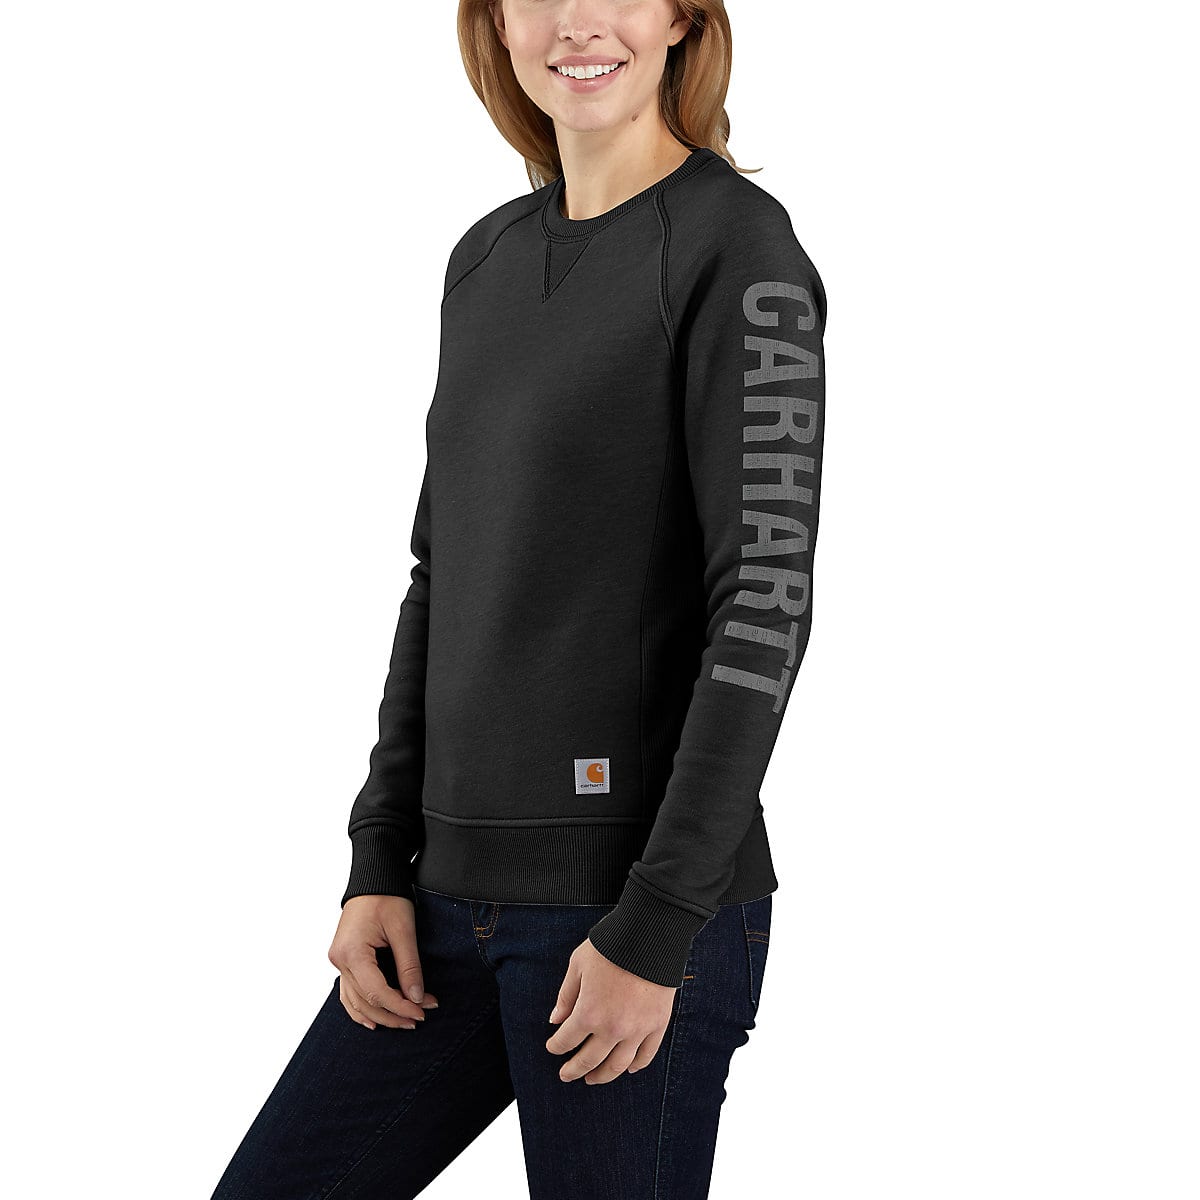 RELAXED FIT MIDWEIGHT CREWNECK BLOCK LOGO SLEEVE GRAPHIC SWEATSHIRT